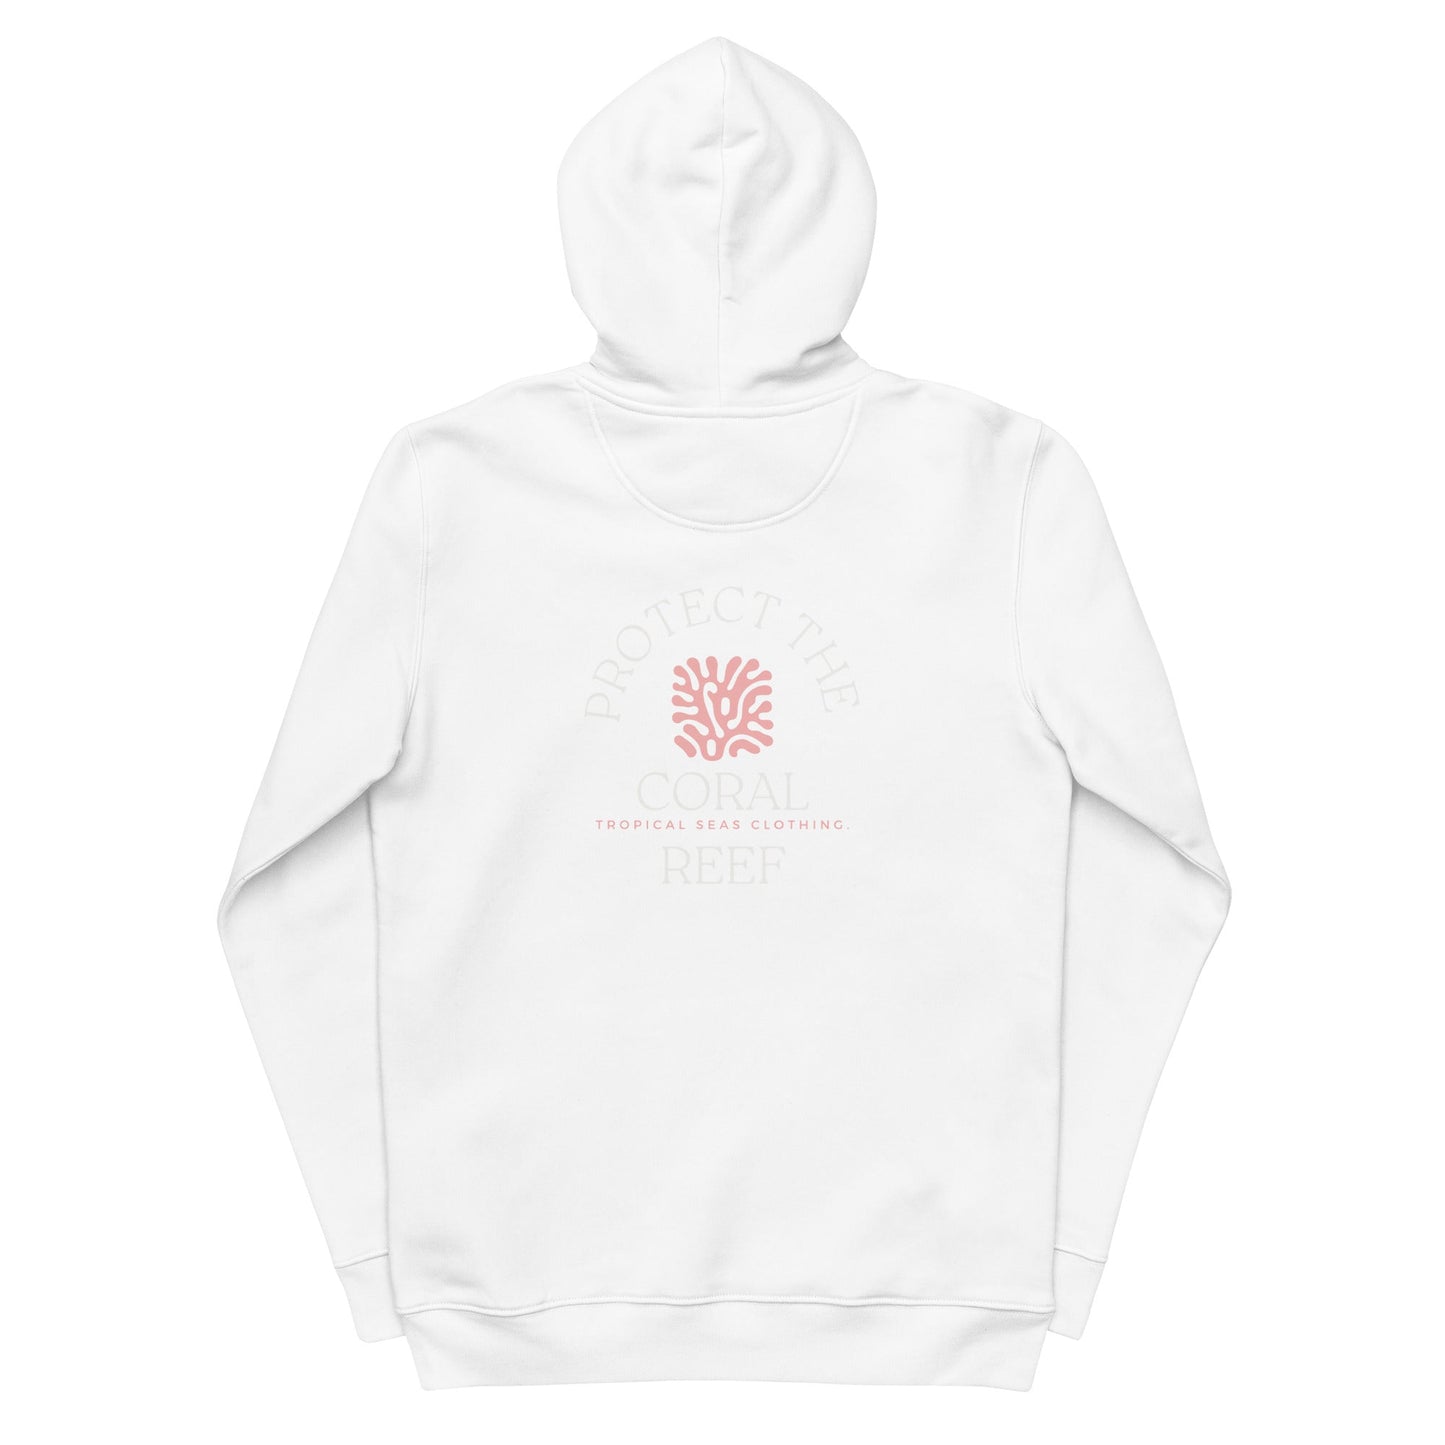 Coral Reef Conservation Hoodie - Tropical Seas Clothing 